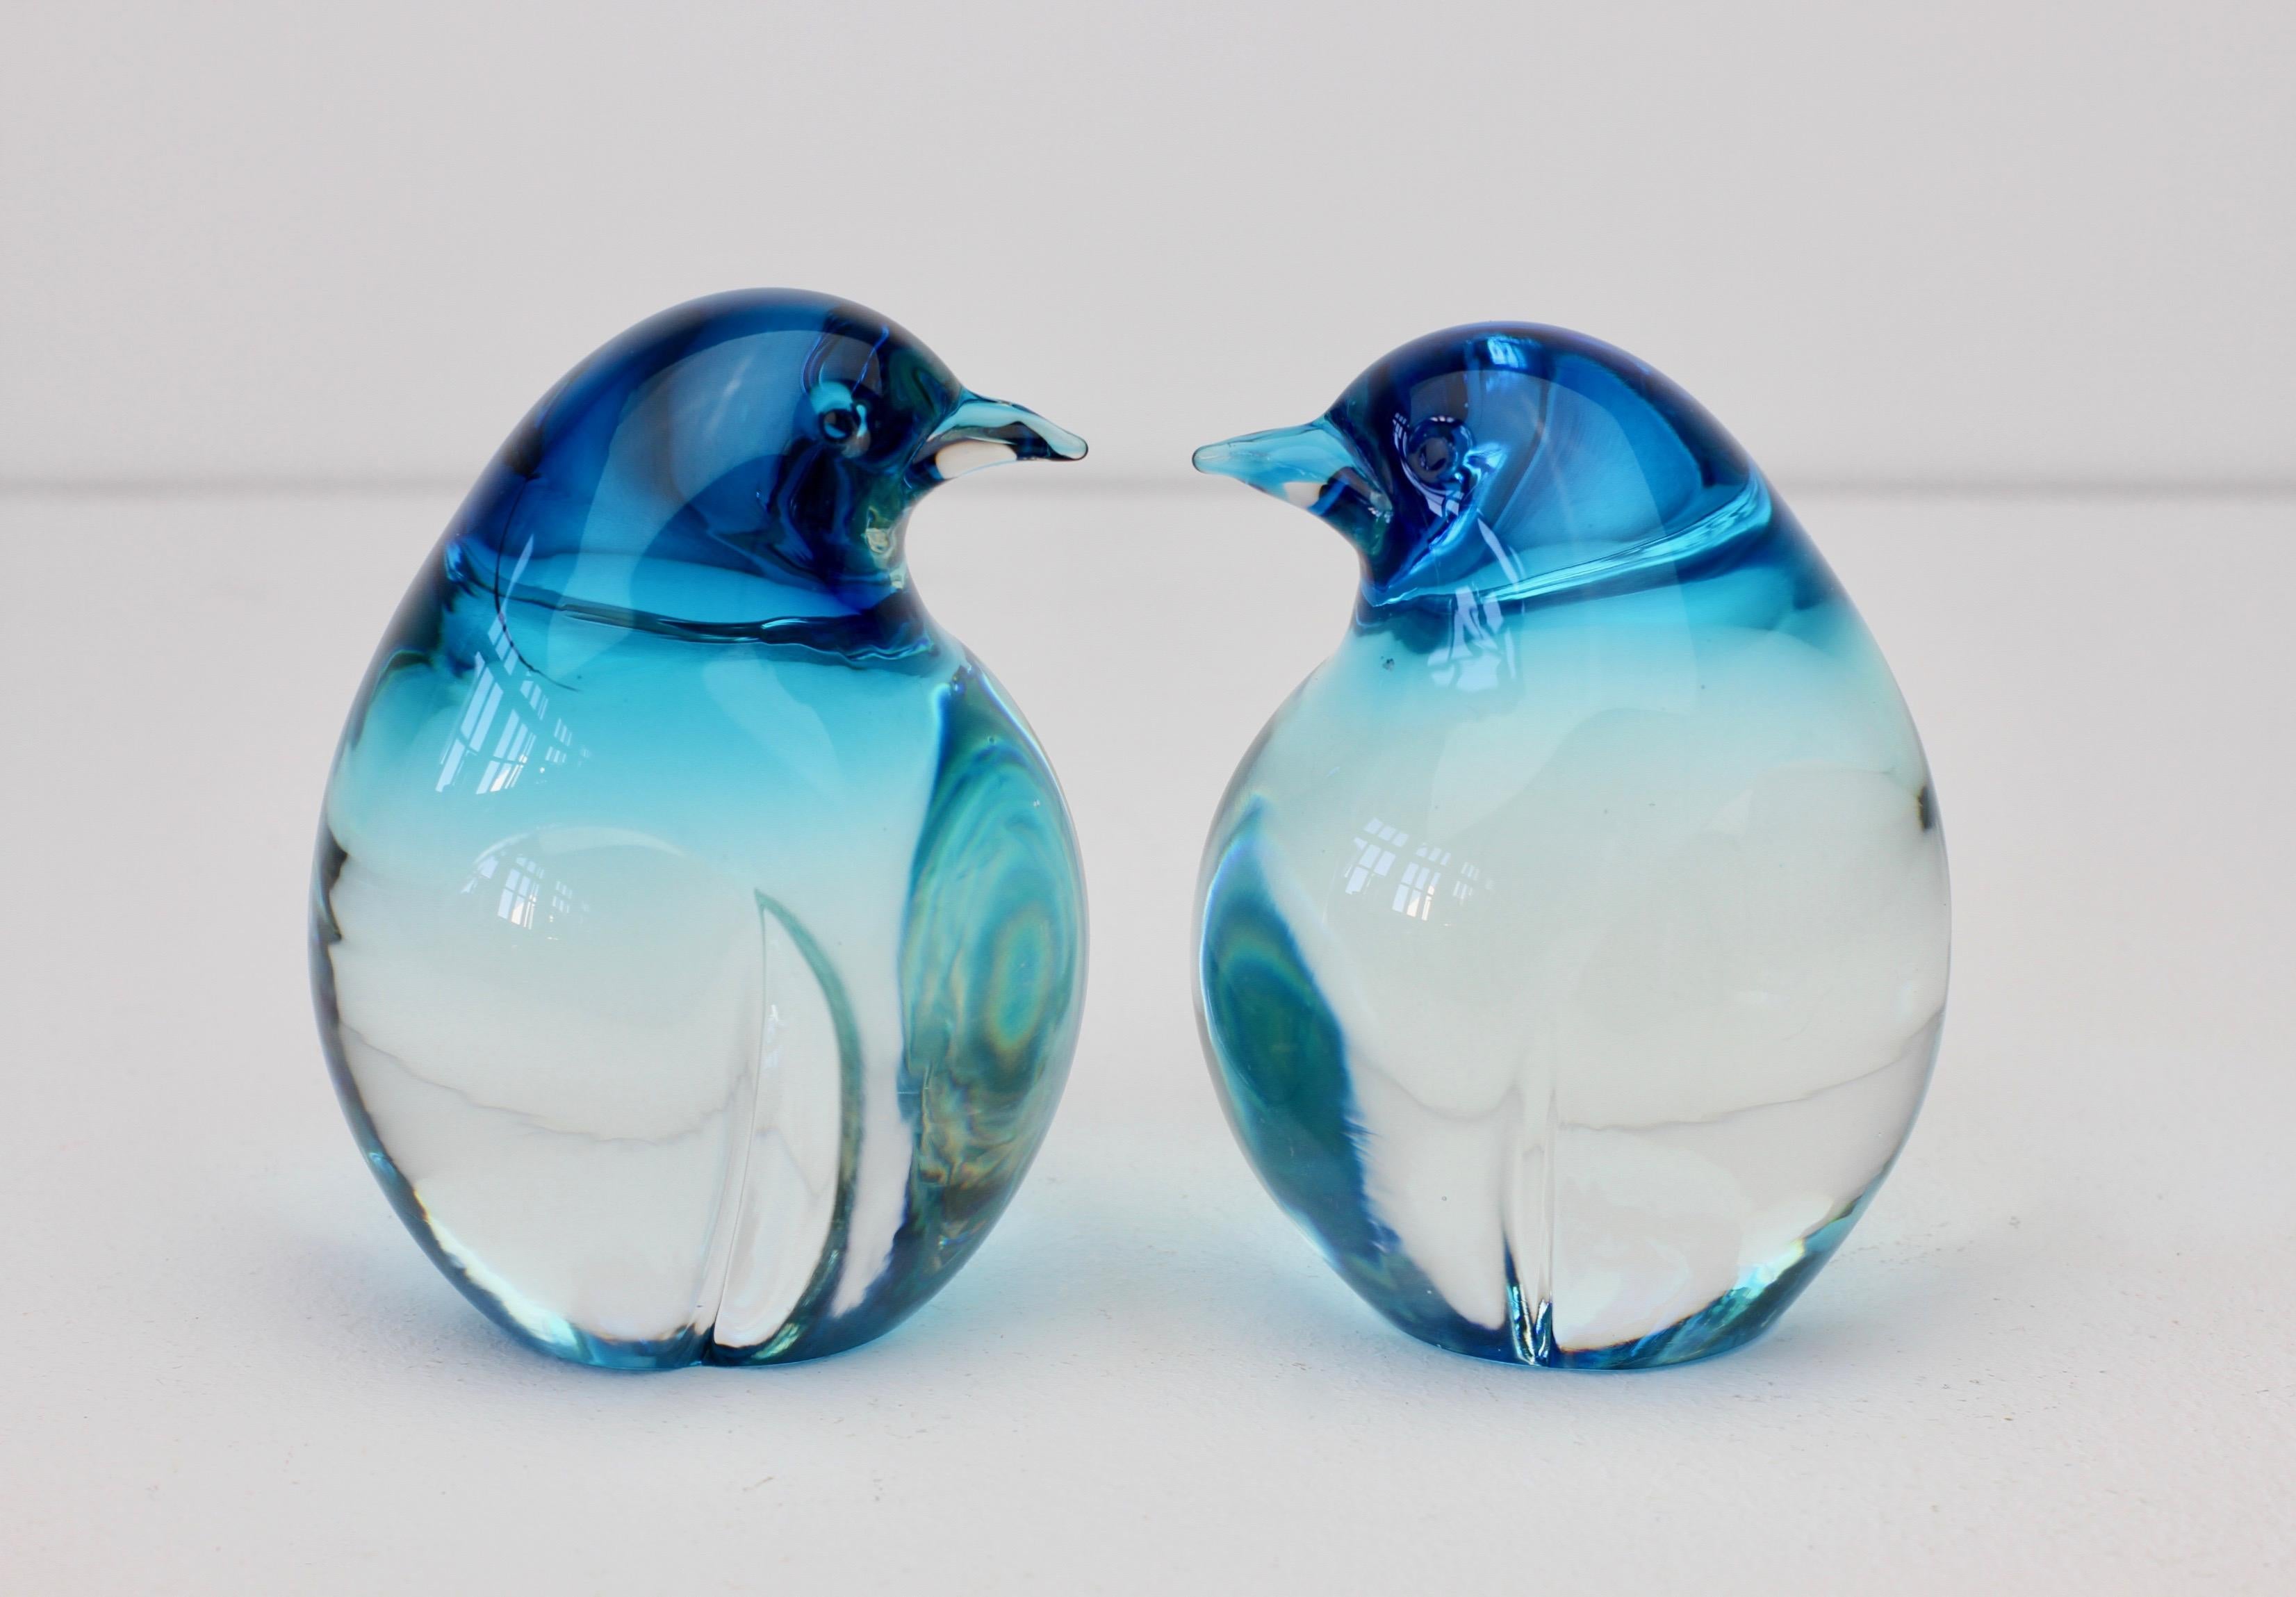 Italian Murano glass pair of birds/penguin figures, often misattributed to Seguso Vetri d'Arte, these were made and signed by the master Murano glass maker Elio Raffaeli - quite rare to find his work signed - these little birds have a wonderful